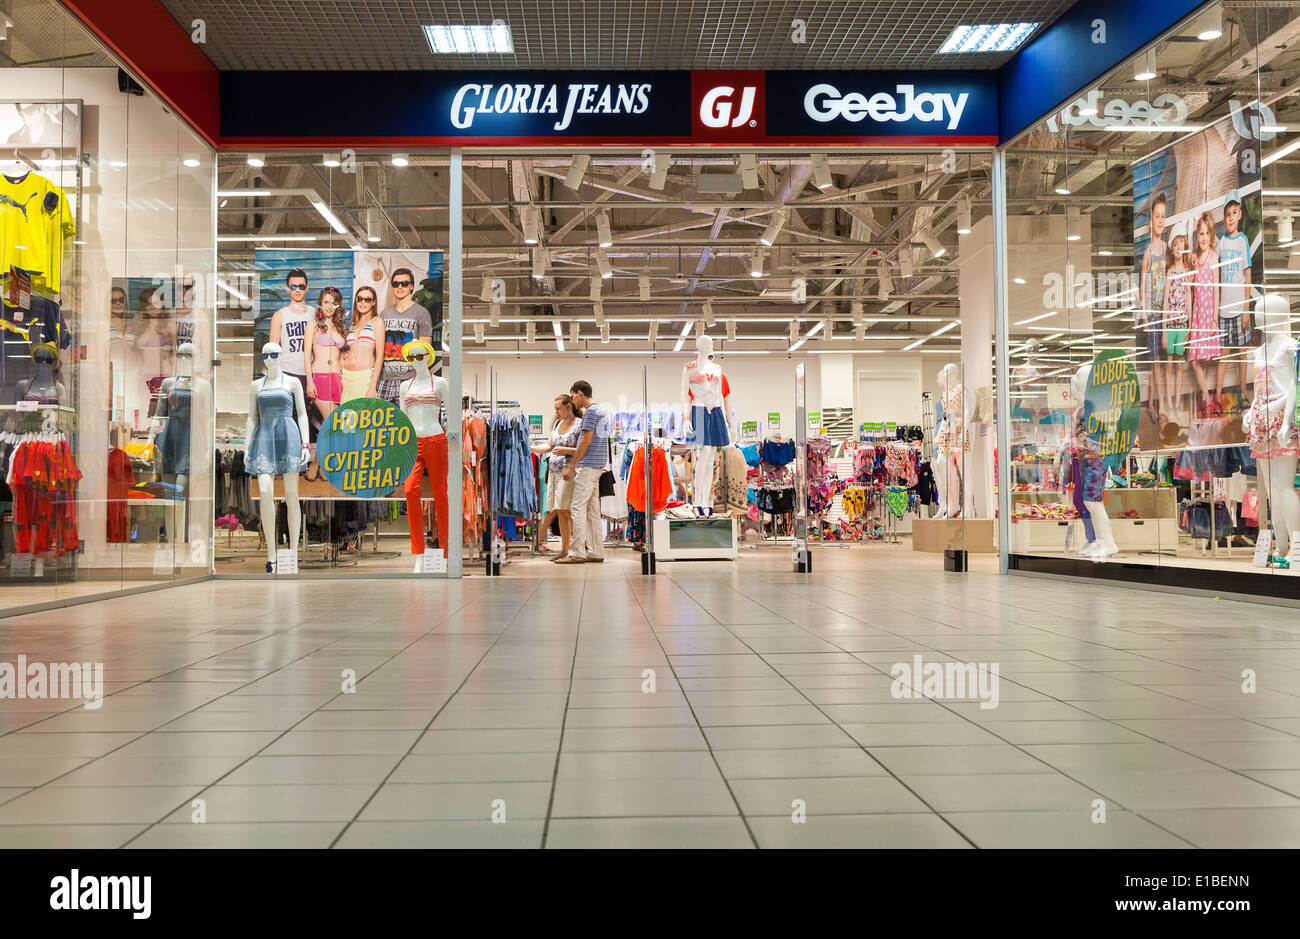 Gloria Jeans department at the mall Stock Photo - Alamy